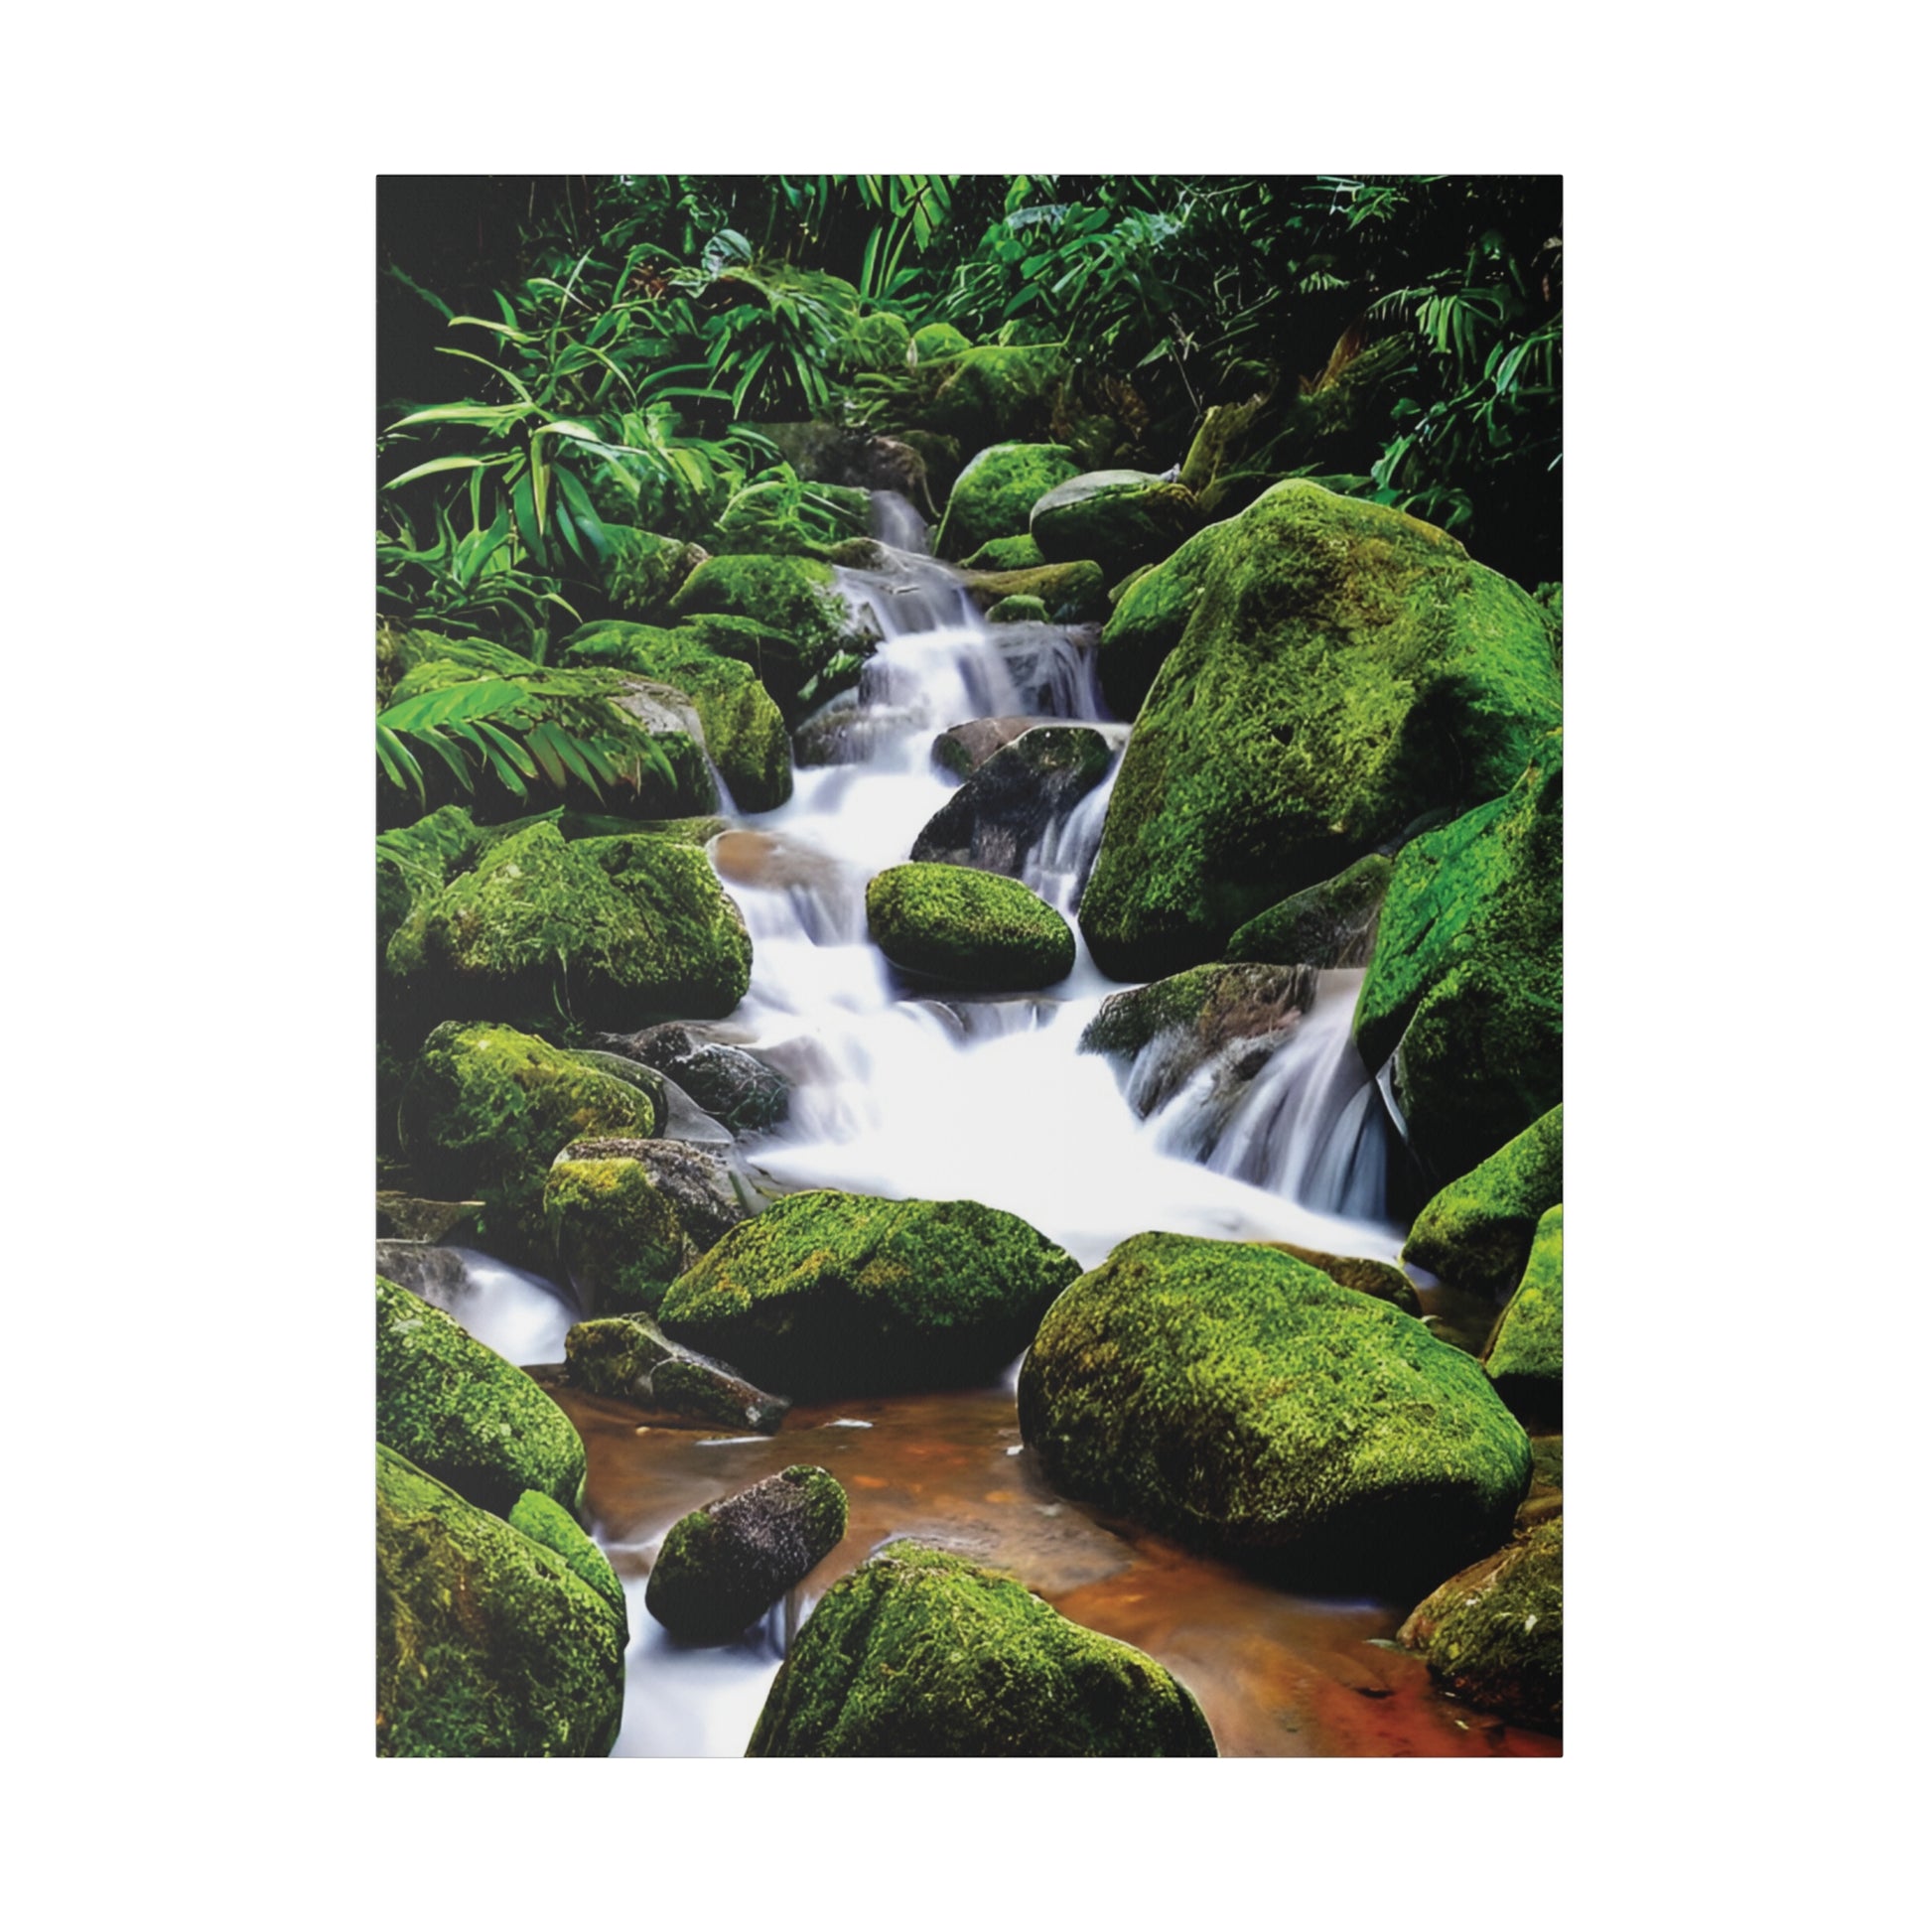  Immerse your space in Colombian allure with custom canvas art. Ethically crafted, blend the vibrant Amazon and Inca heritage to curate a unique wall masterpiece.